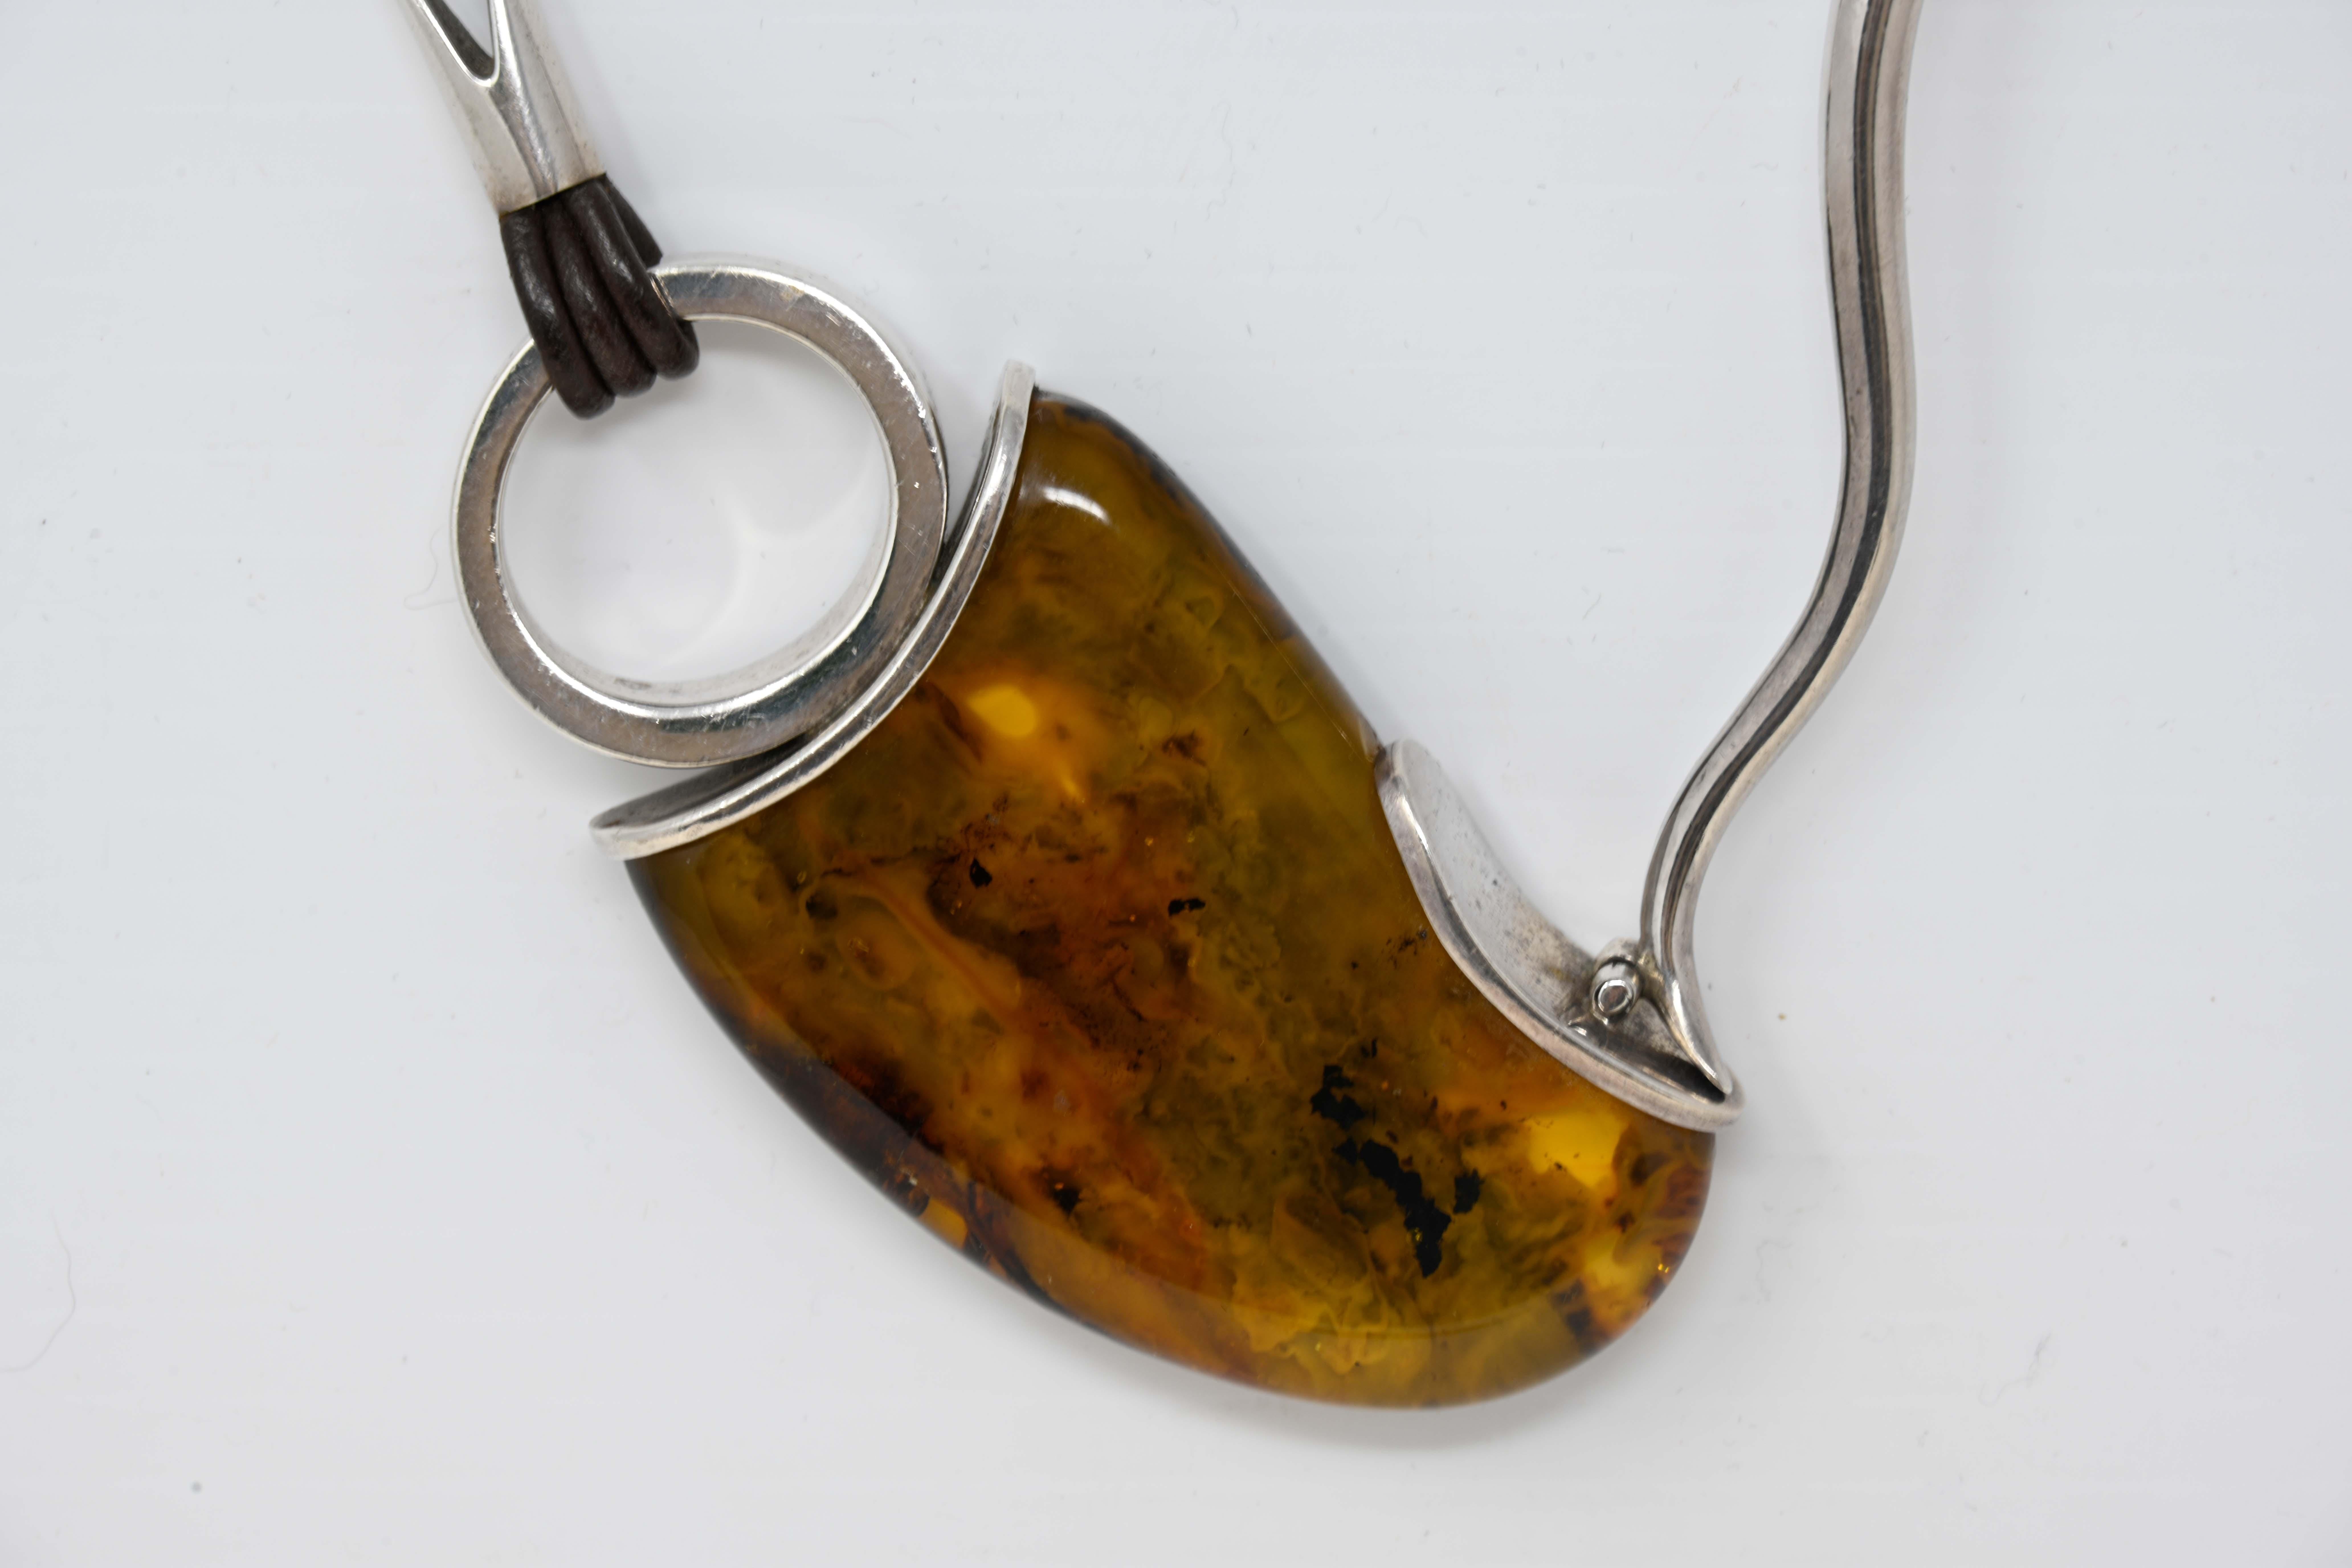 Handmade modernist sterling silver necklace with a large natural Baltic amber. Stamped 925 and includes the maker mark E & M. The amber measures 7cm long x 4.5 cm wide x 1.2 cm thick, The necklace measures 18 inches long, plus the pendant. Preowned,